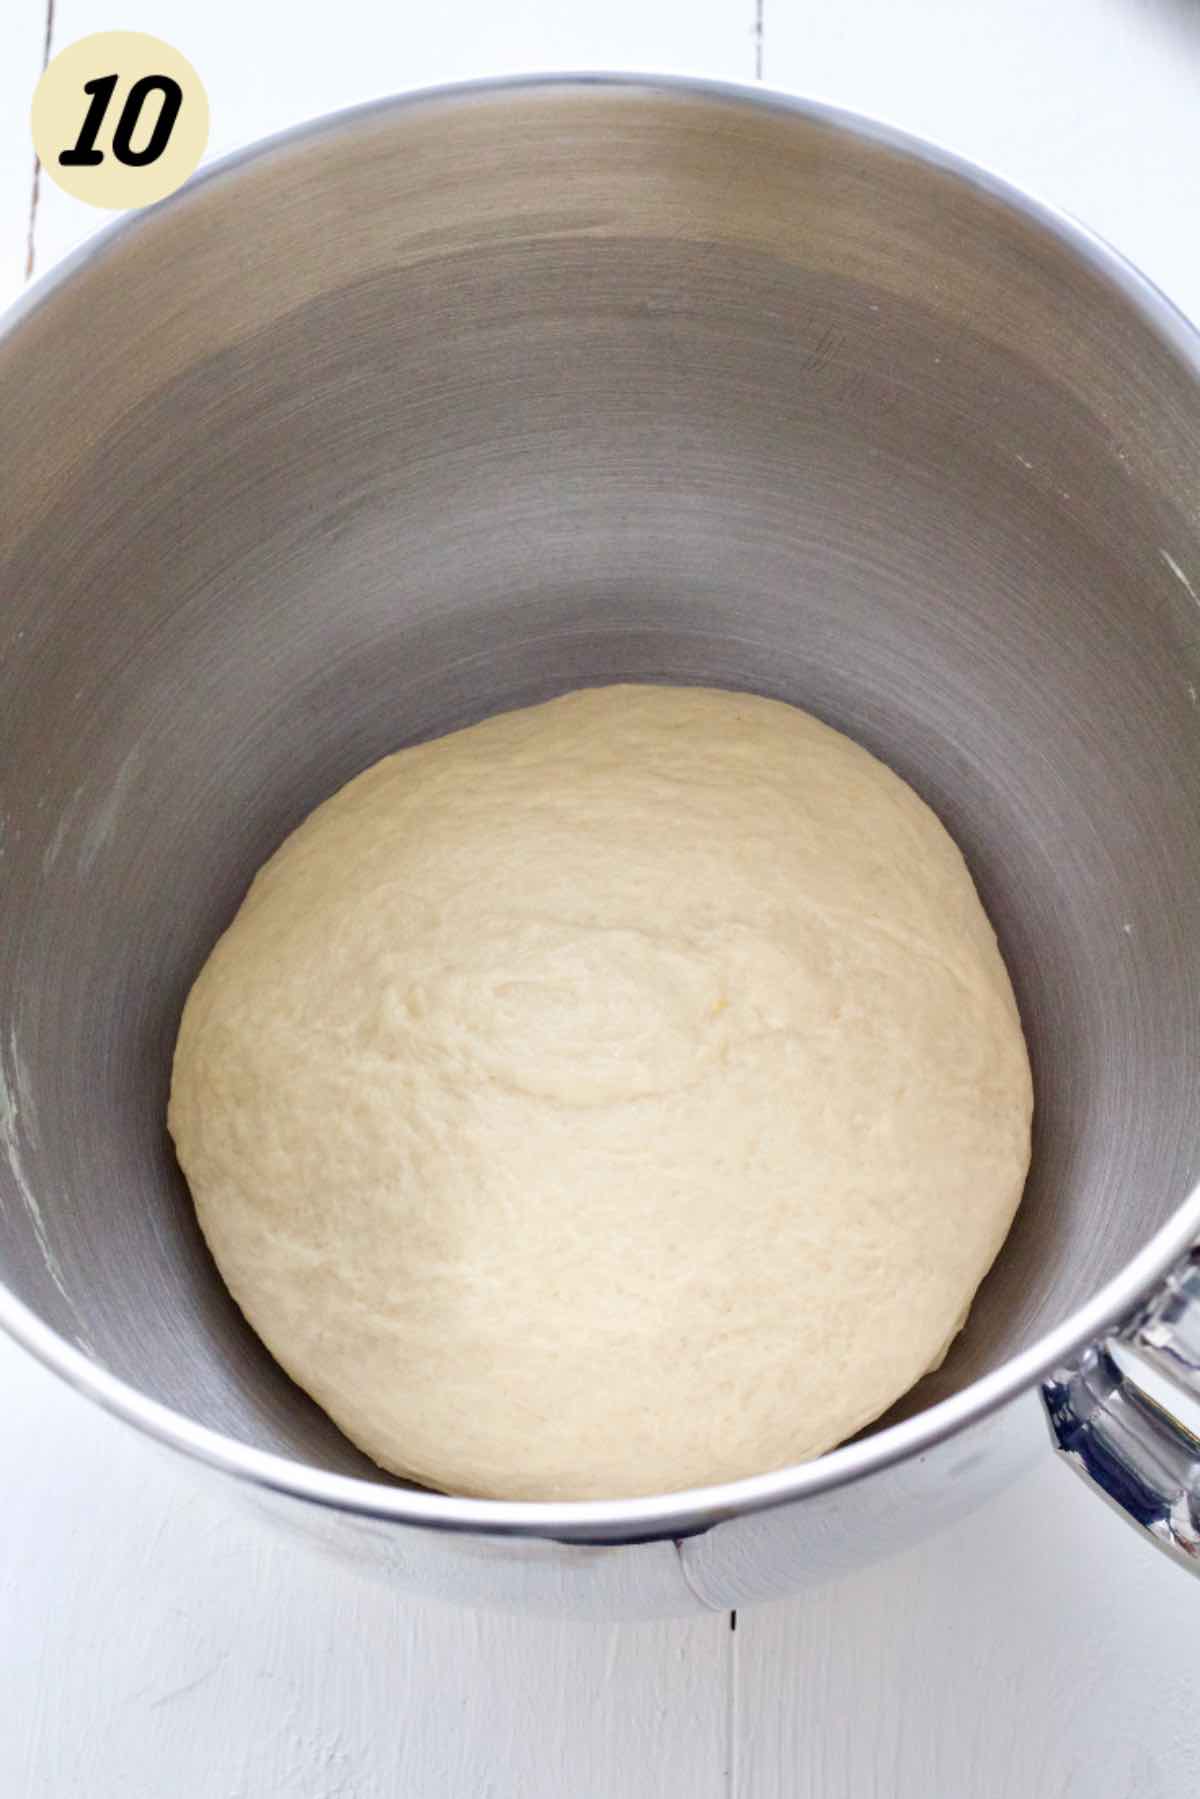 Kneaded dough ready for proofing.